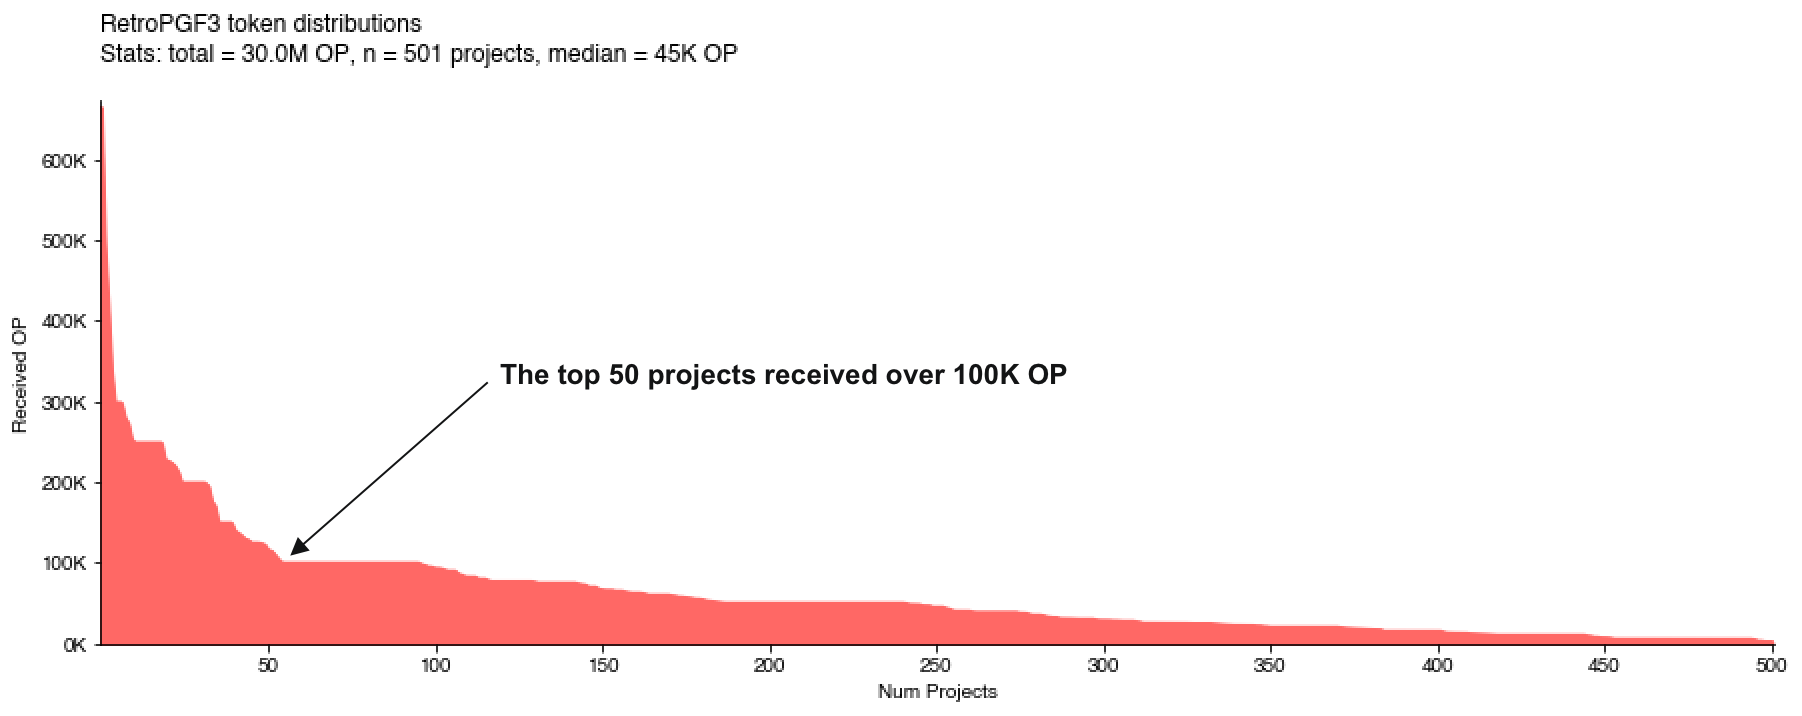 The RetroPGF3 token distribution was relatively flat outside the top 50